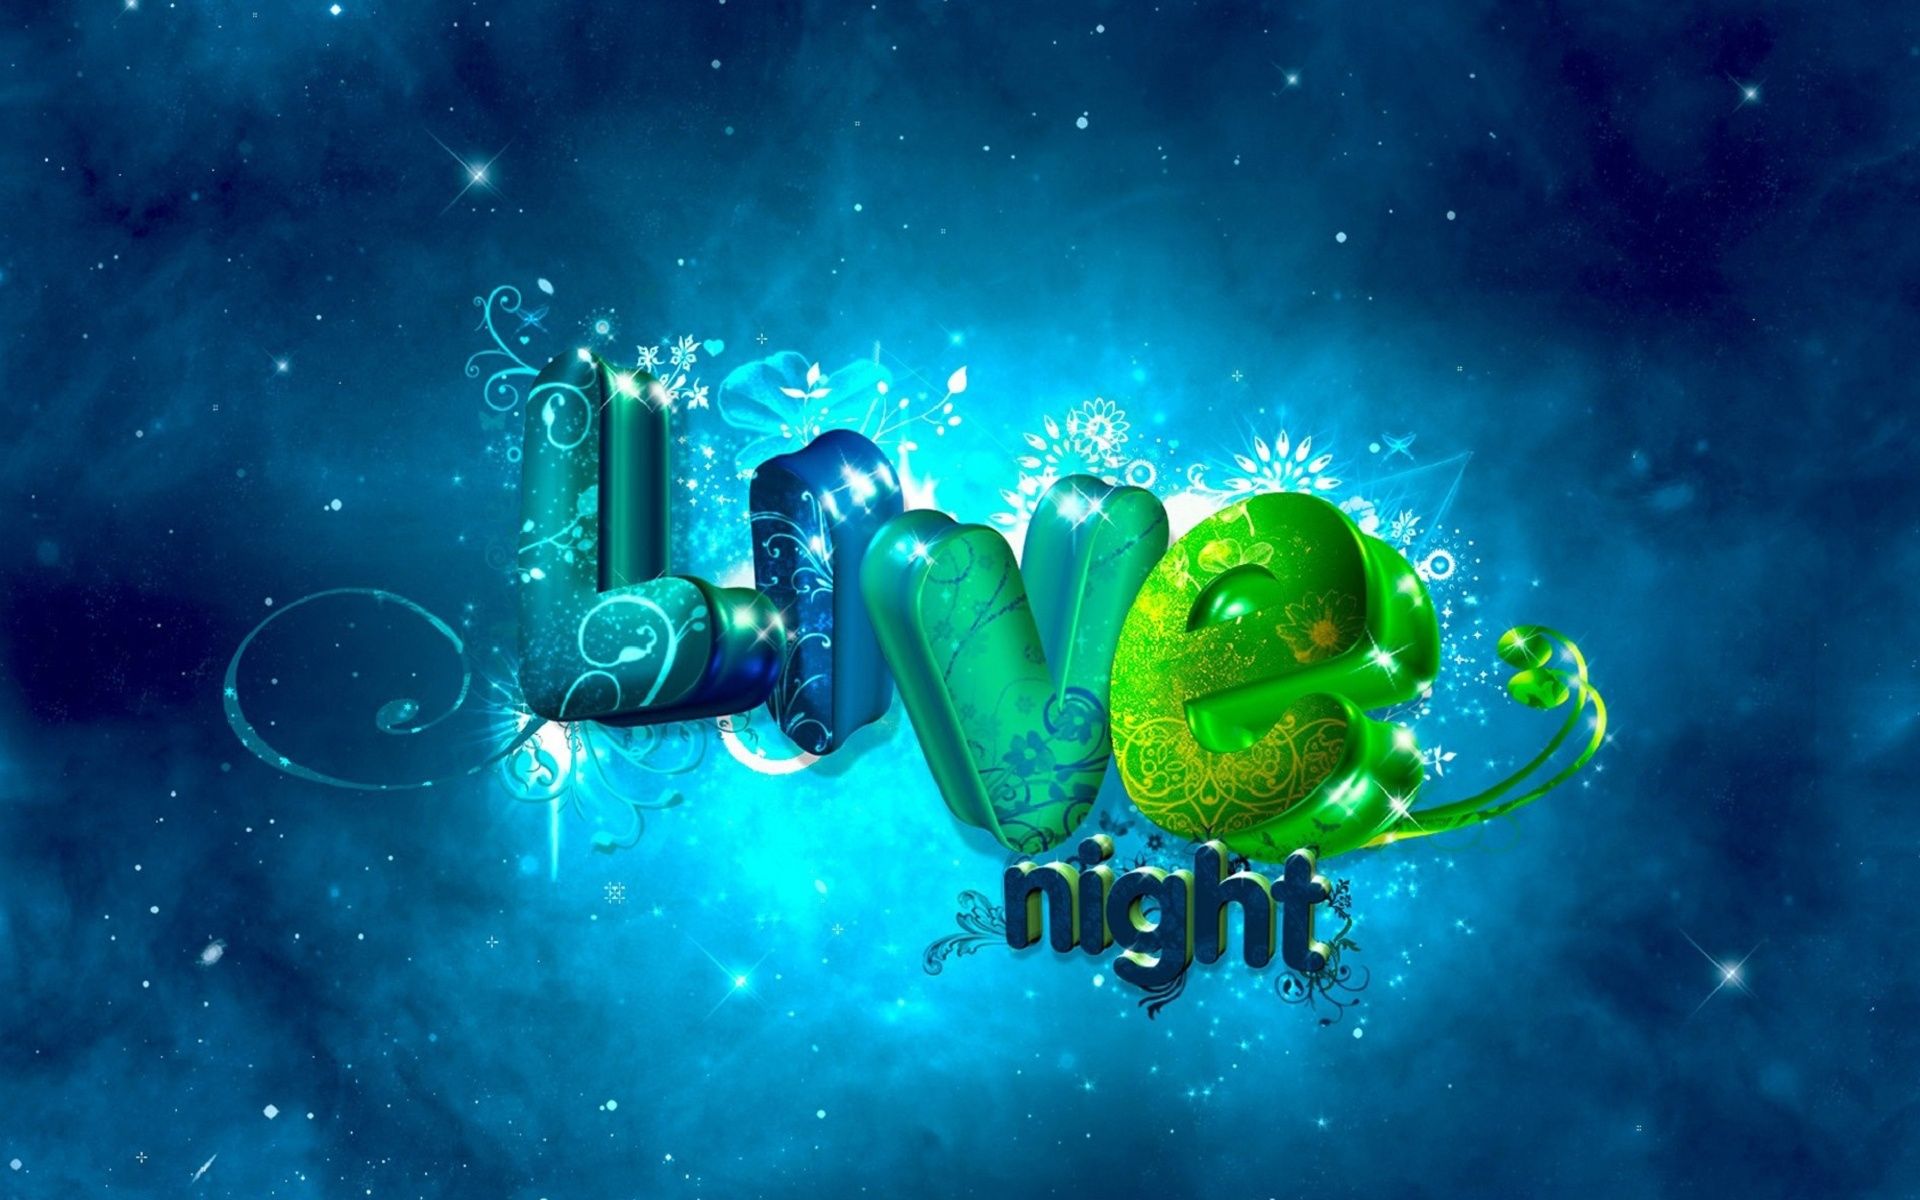 Live Night Wallpapers HD Backgrounds